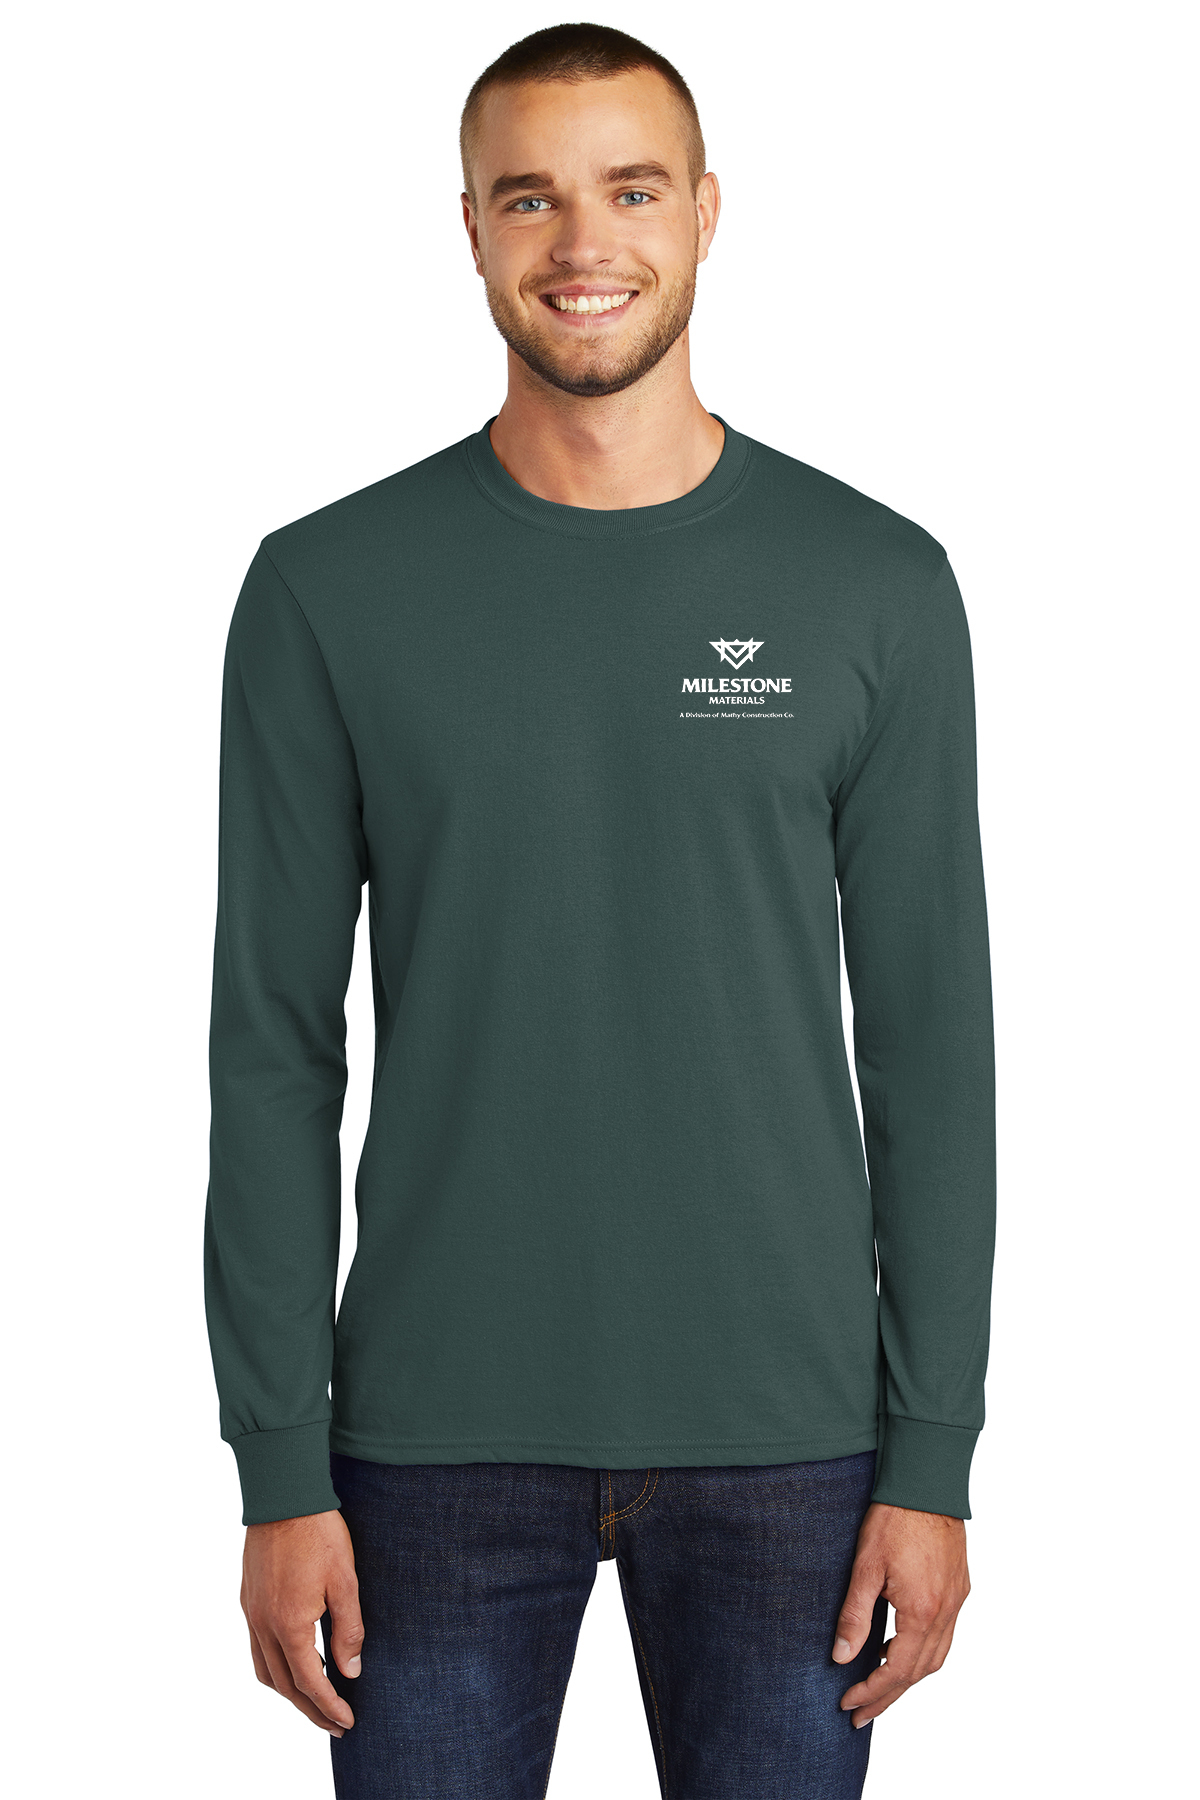 Excellence Milestone Materials Tall Long Sleeve- Multiple Colors